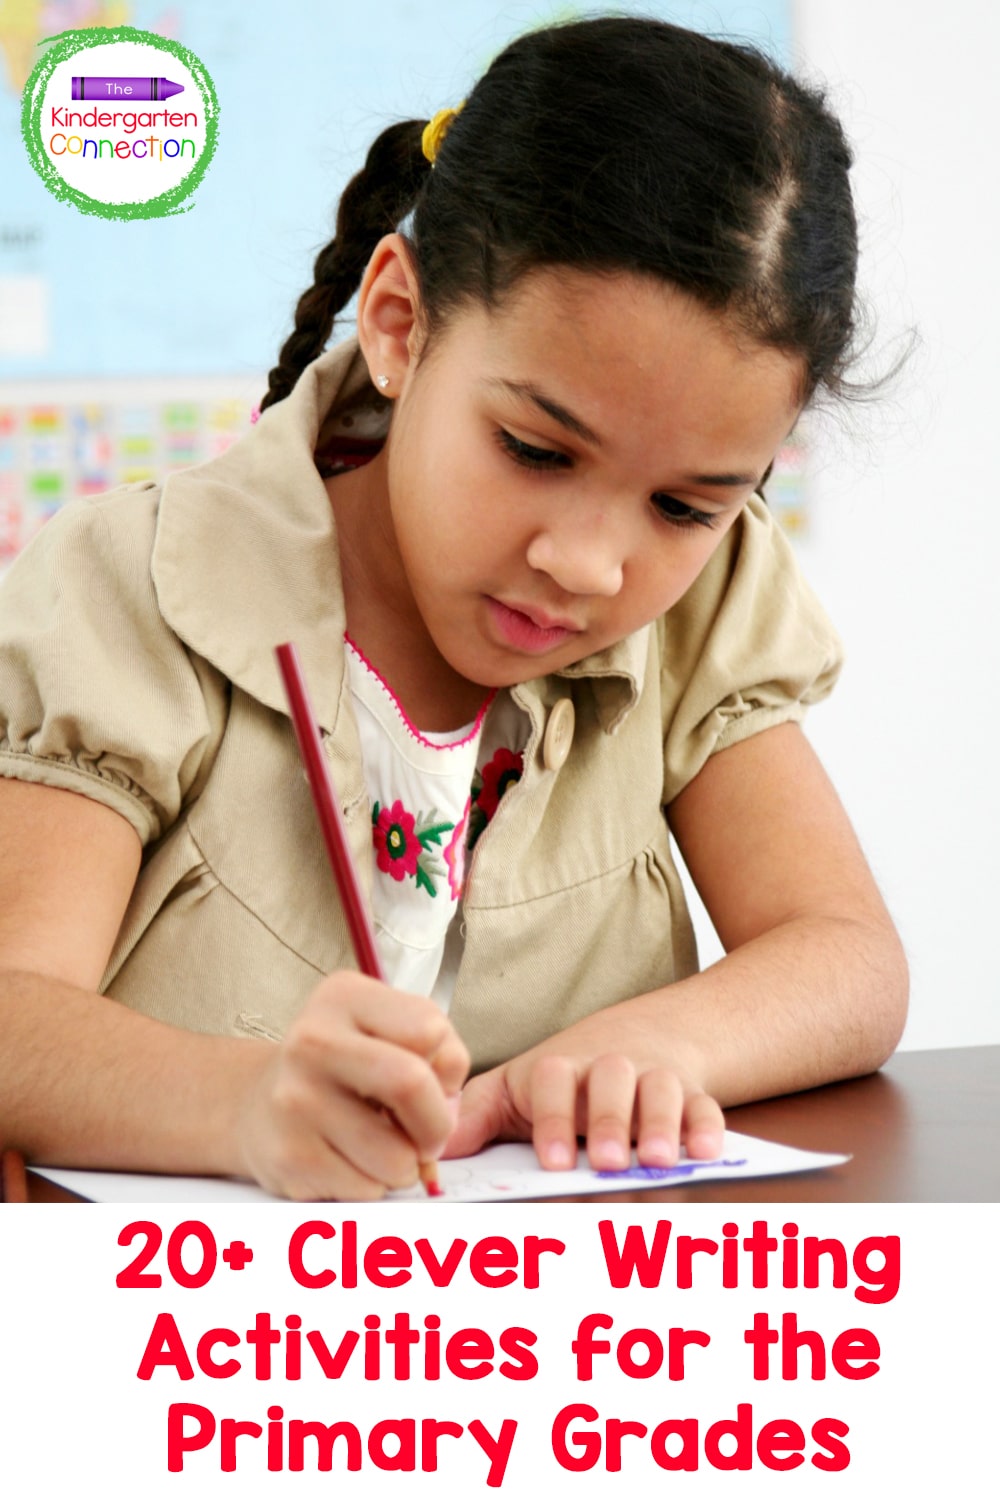 For young students, writing can be tedious and difficult. Here are over 20 clever writing activities for primary grades to get children excited about writing tasks.